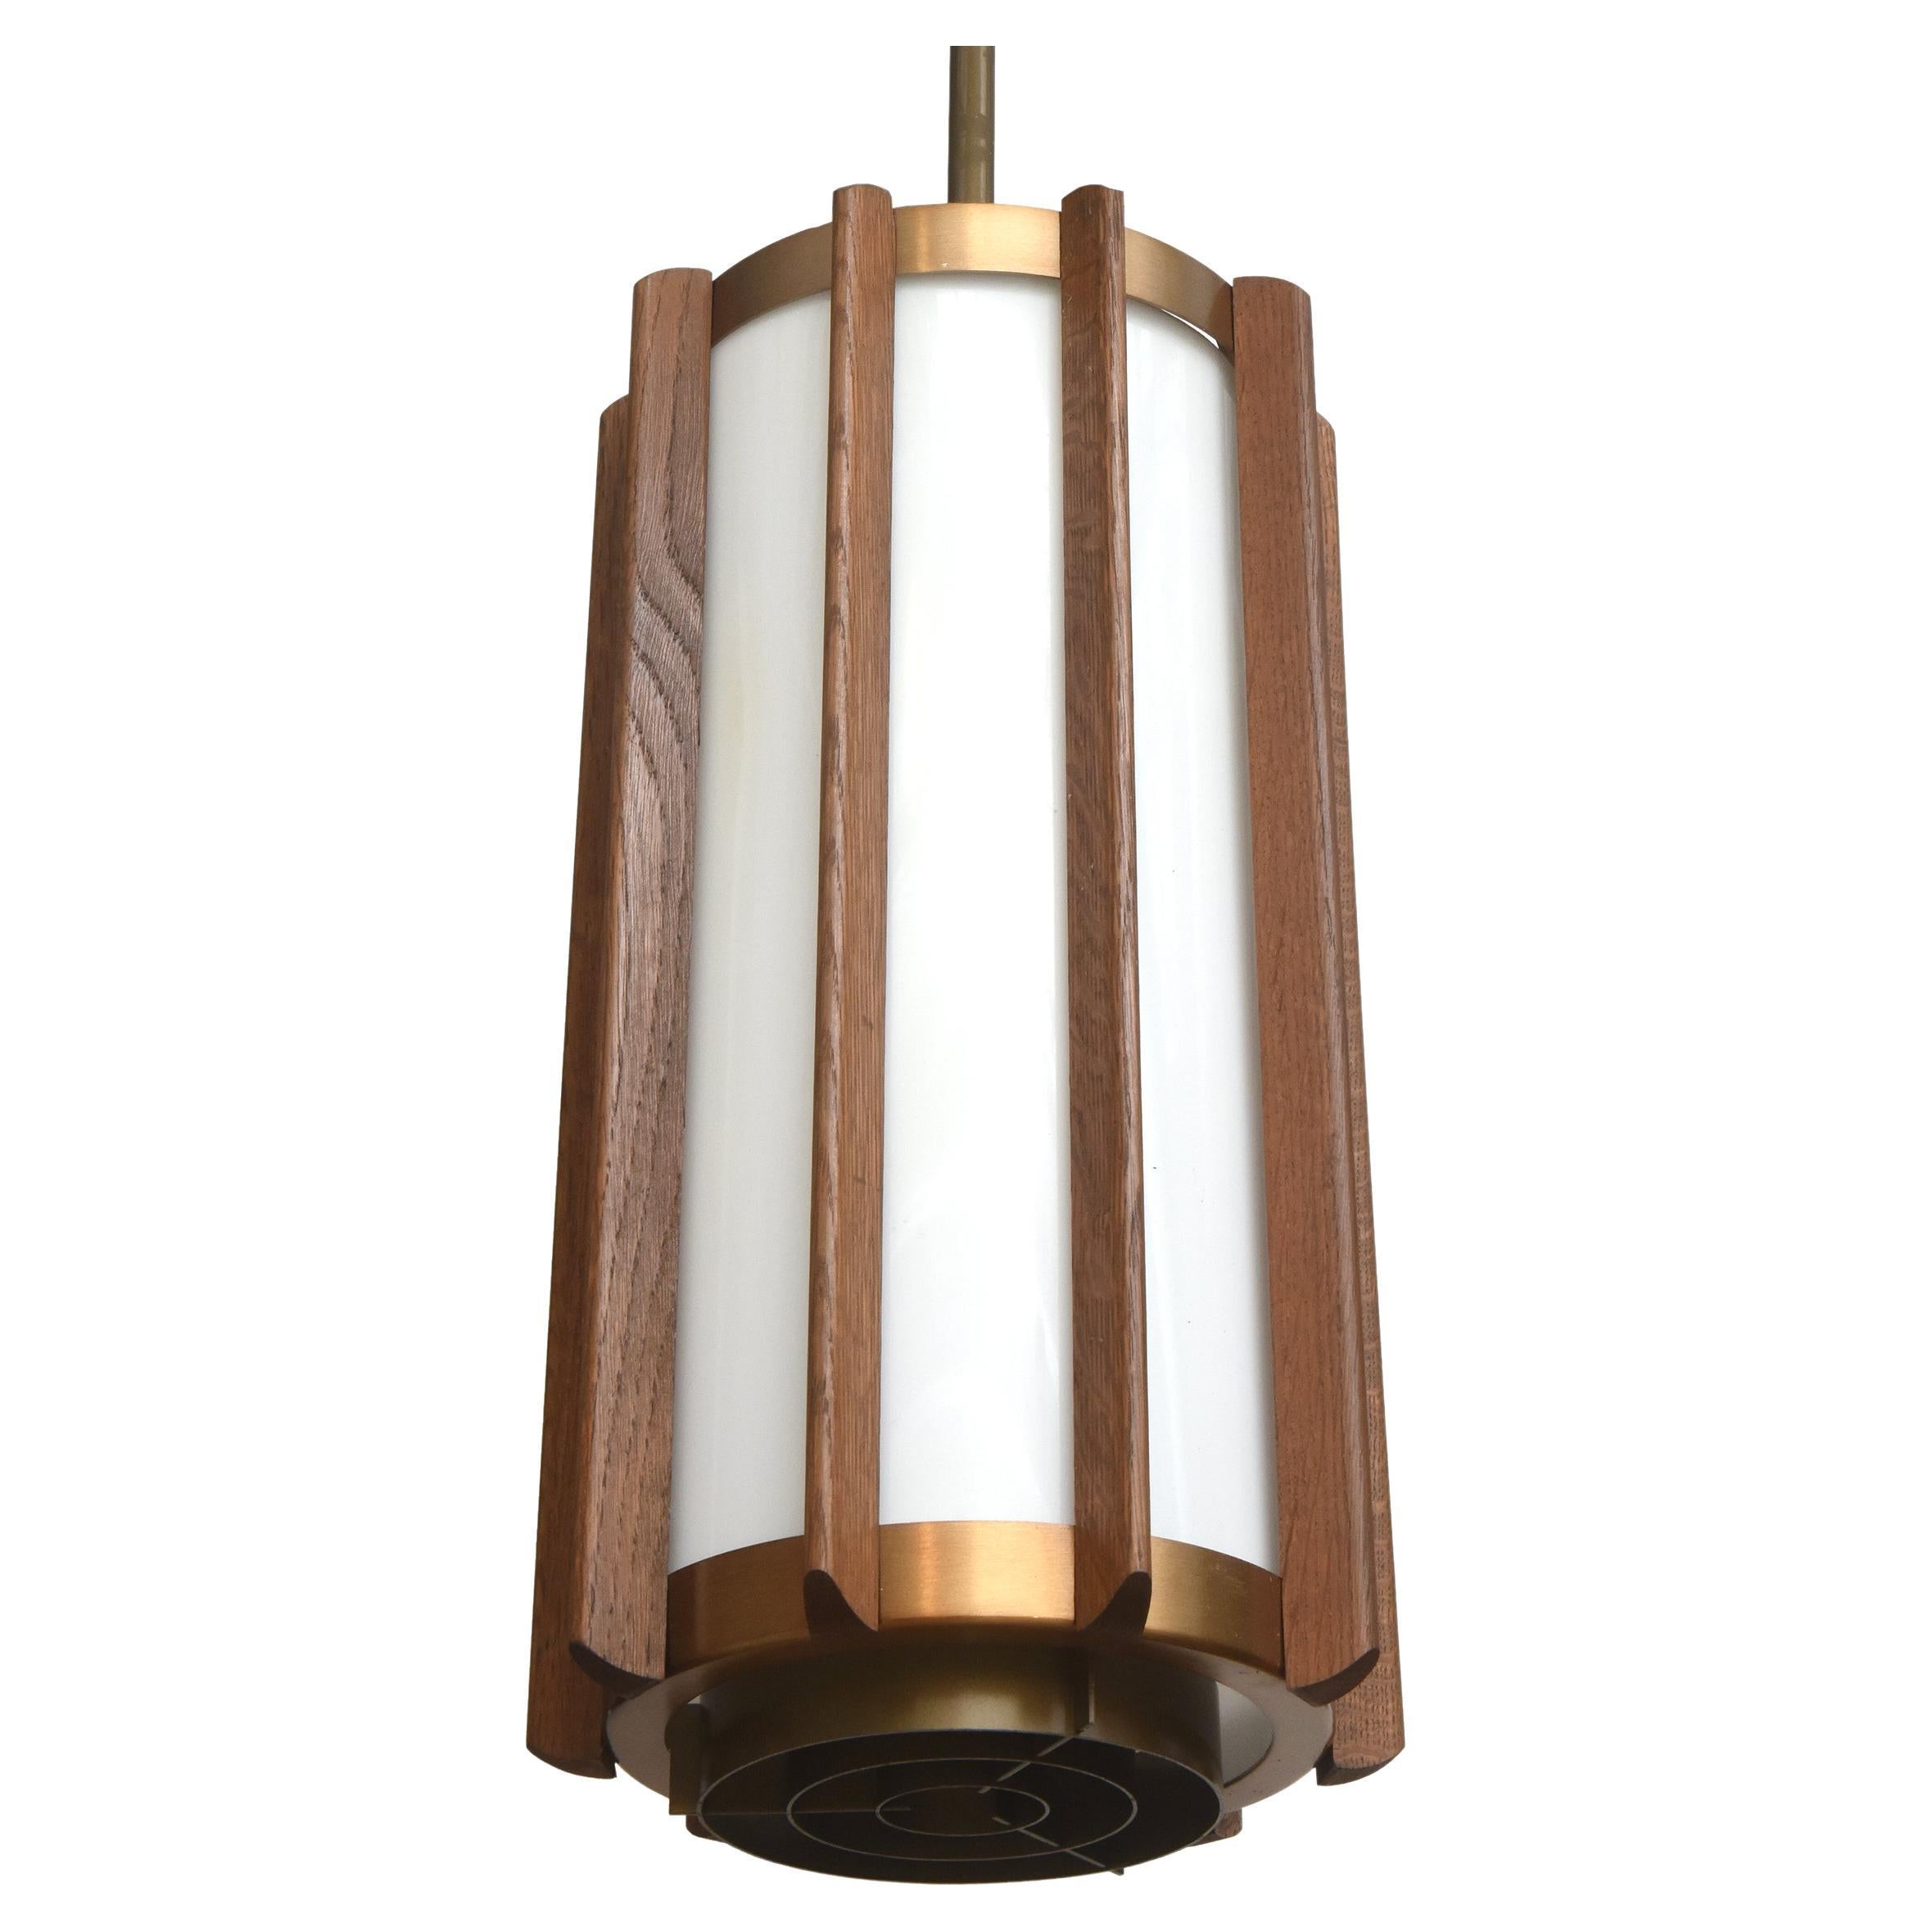 Large-Scale 1960s Walnut and Bronze Ceiling Pendants (Six Available)